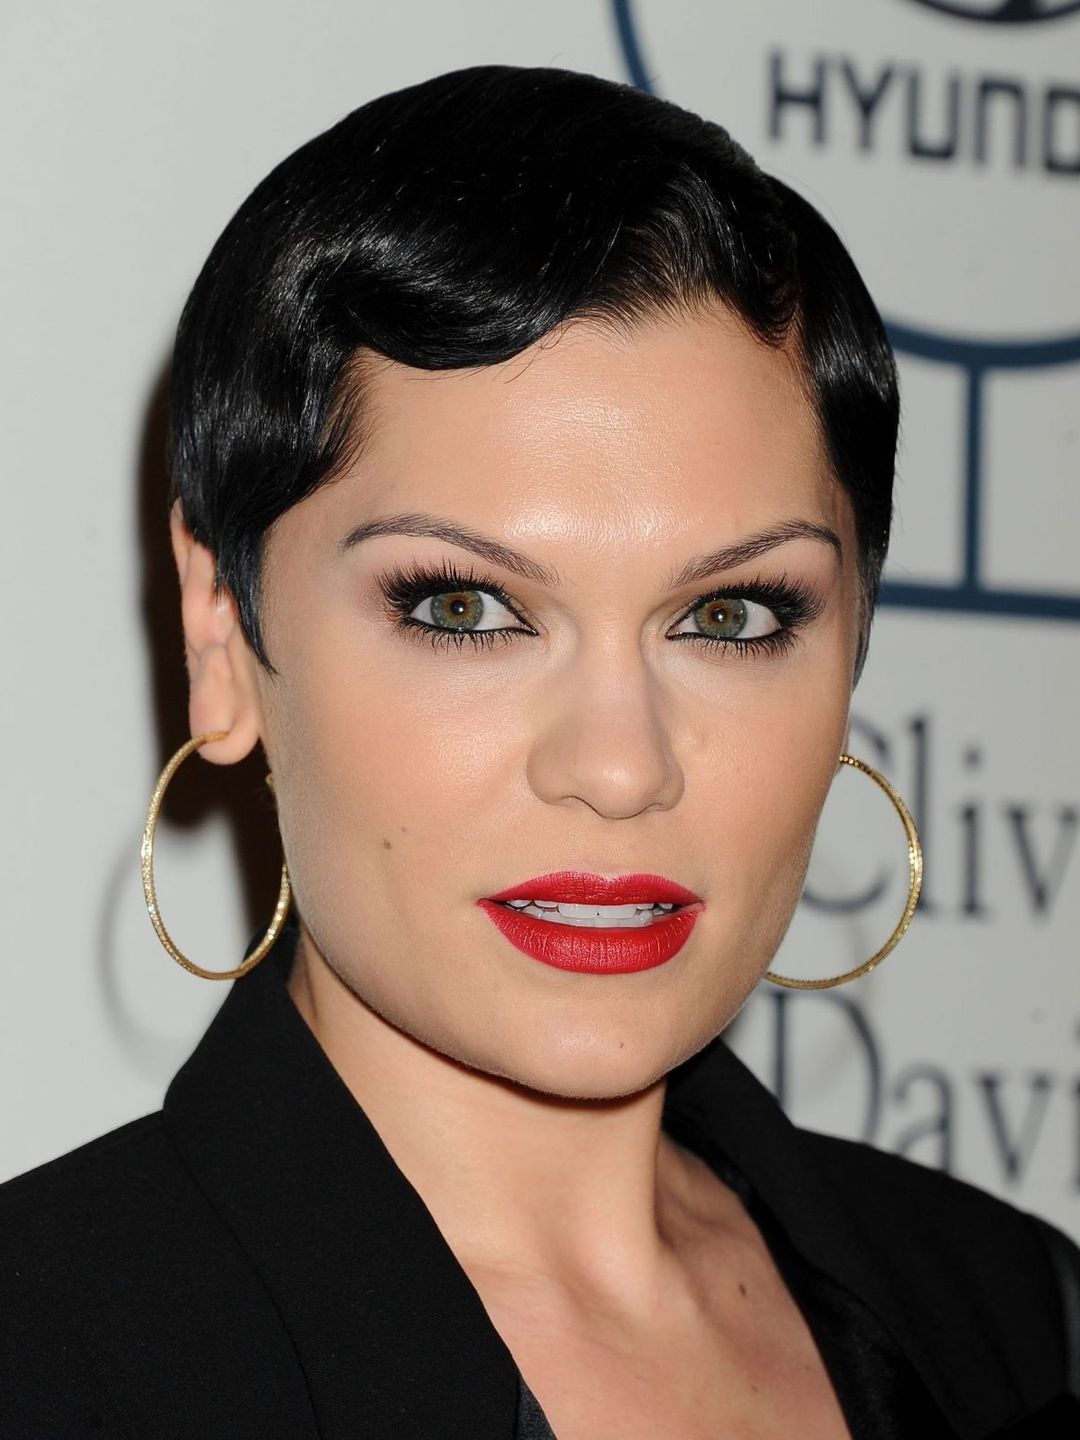 Jessie J in real life